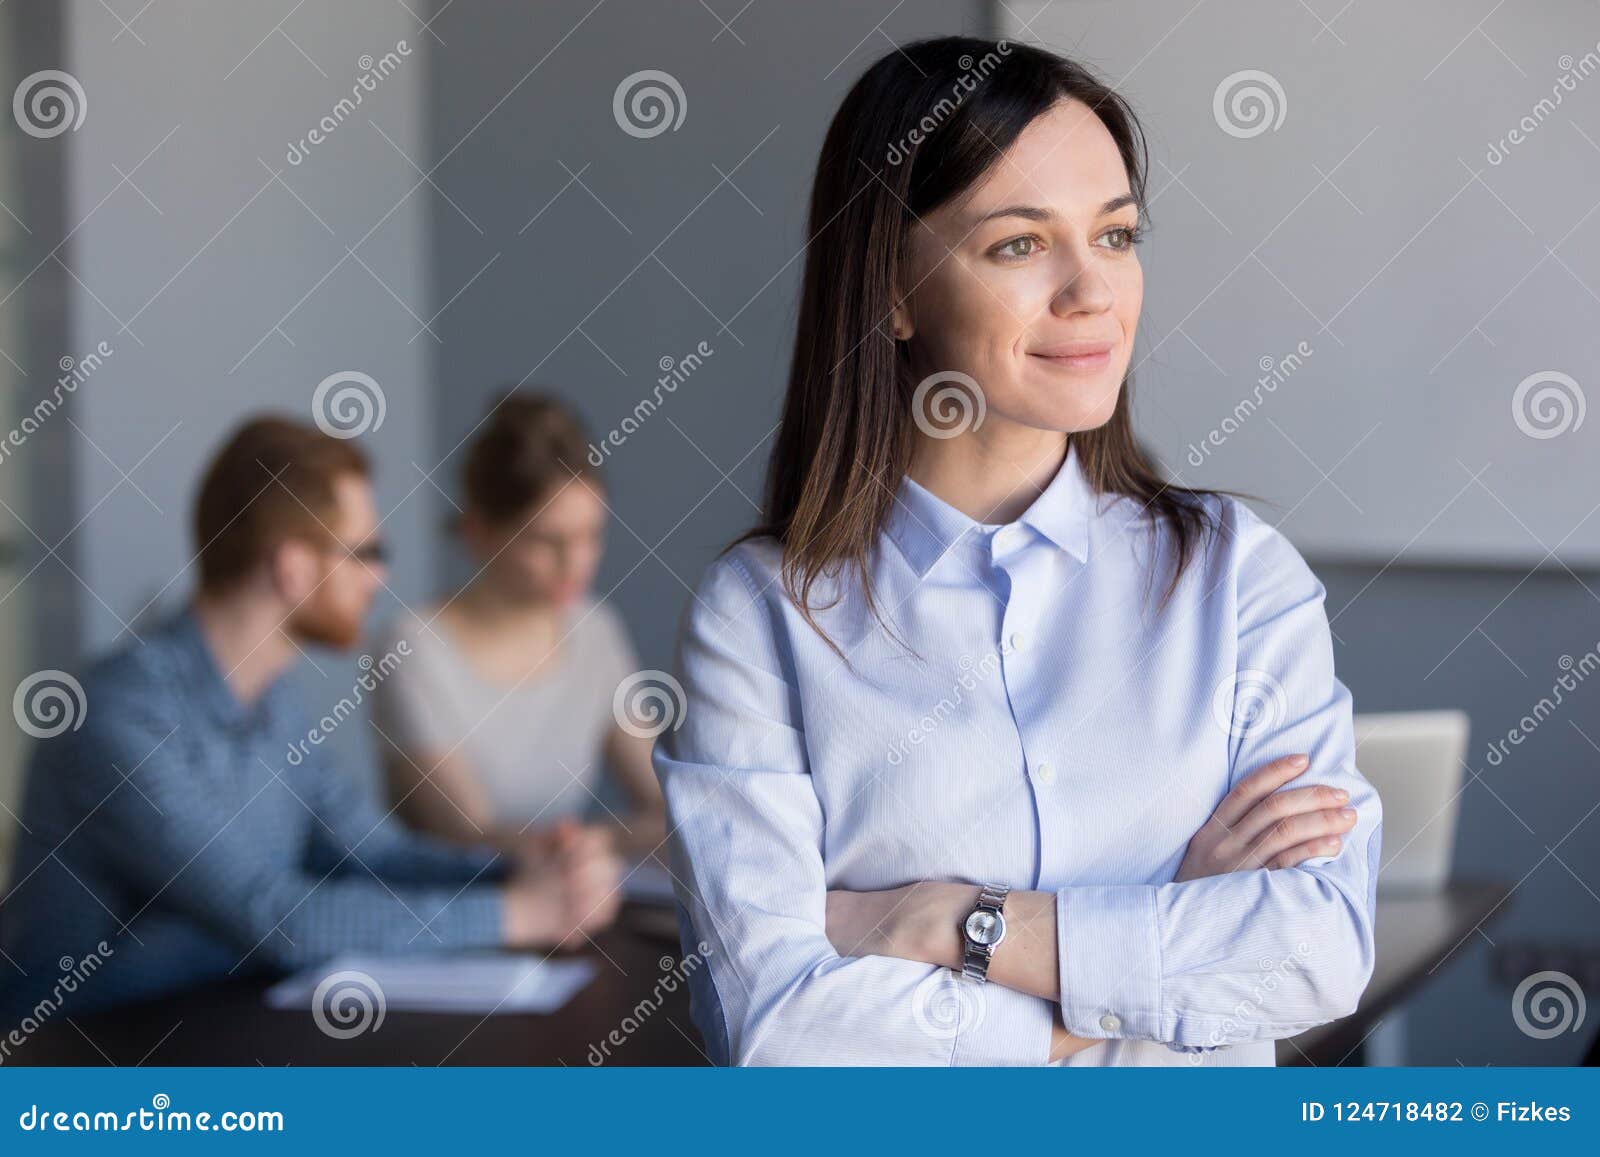 smiling businesswoman looking from window dreaming of future suc